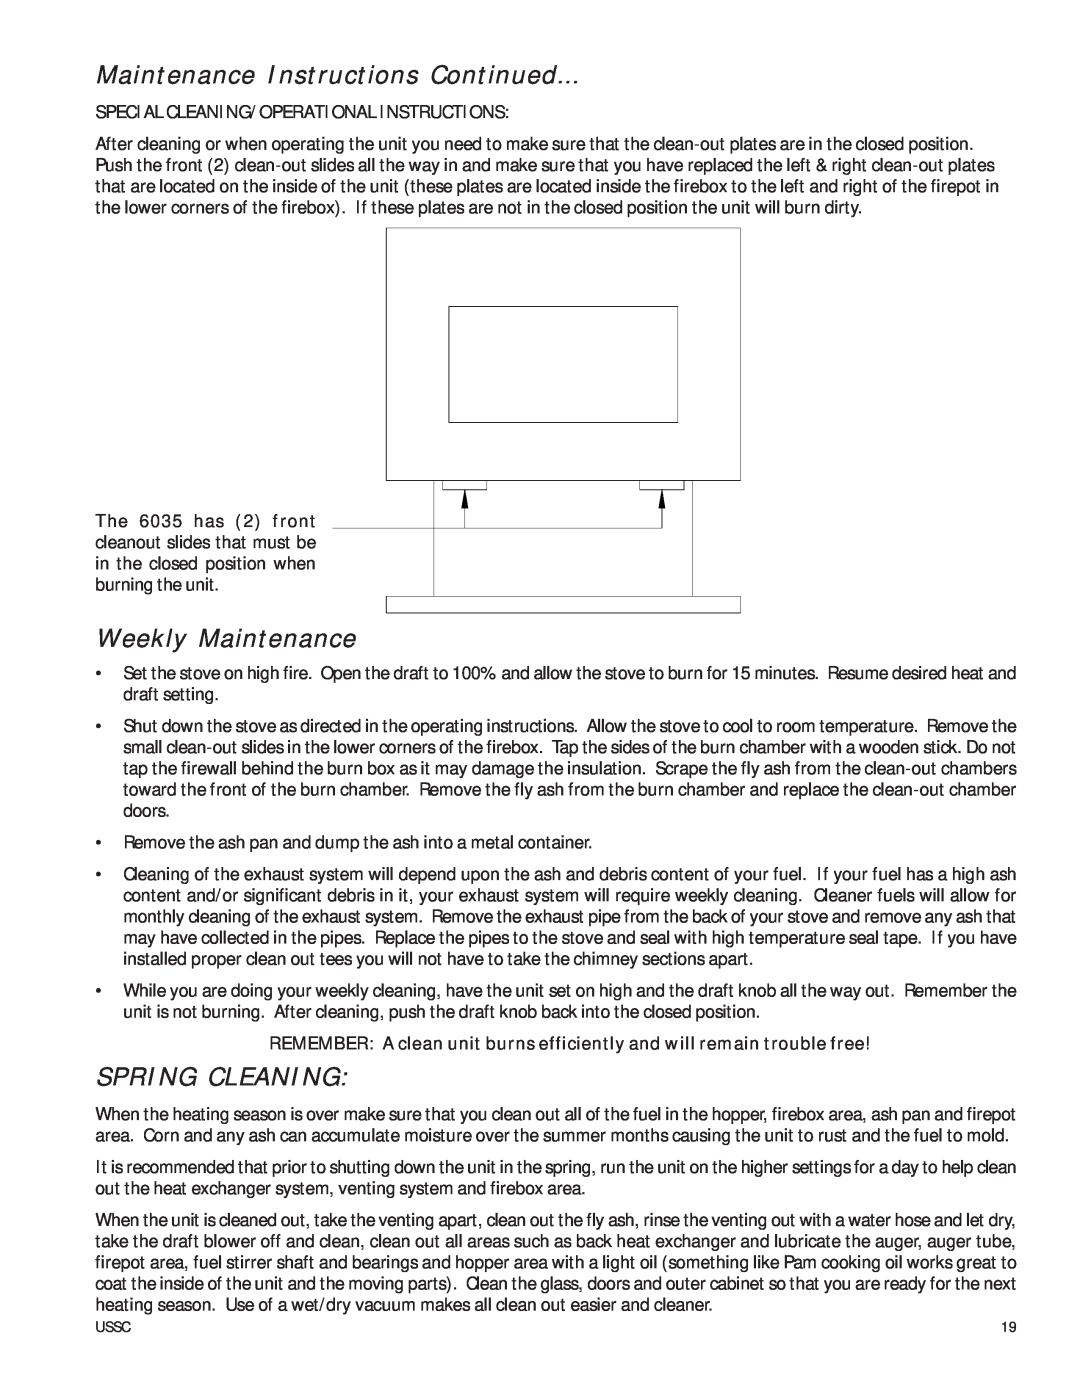 United States Stove 6035 owner manual Maintenance Instructions Continued, Weekly Maintenance, Spring Cleaning 